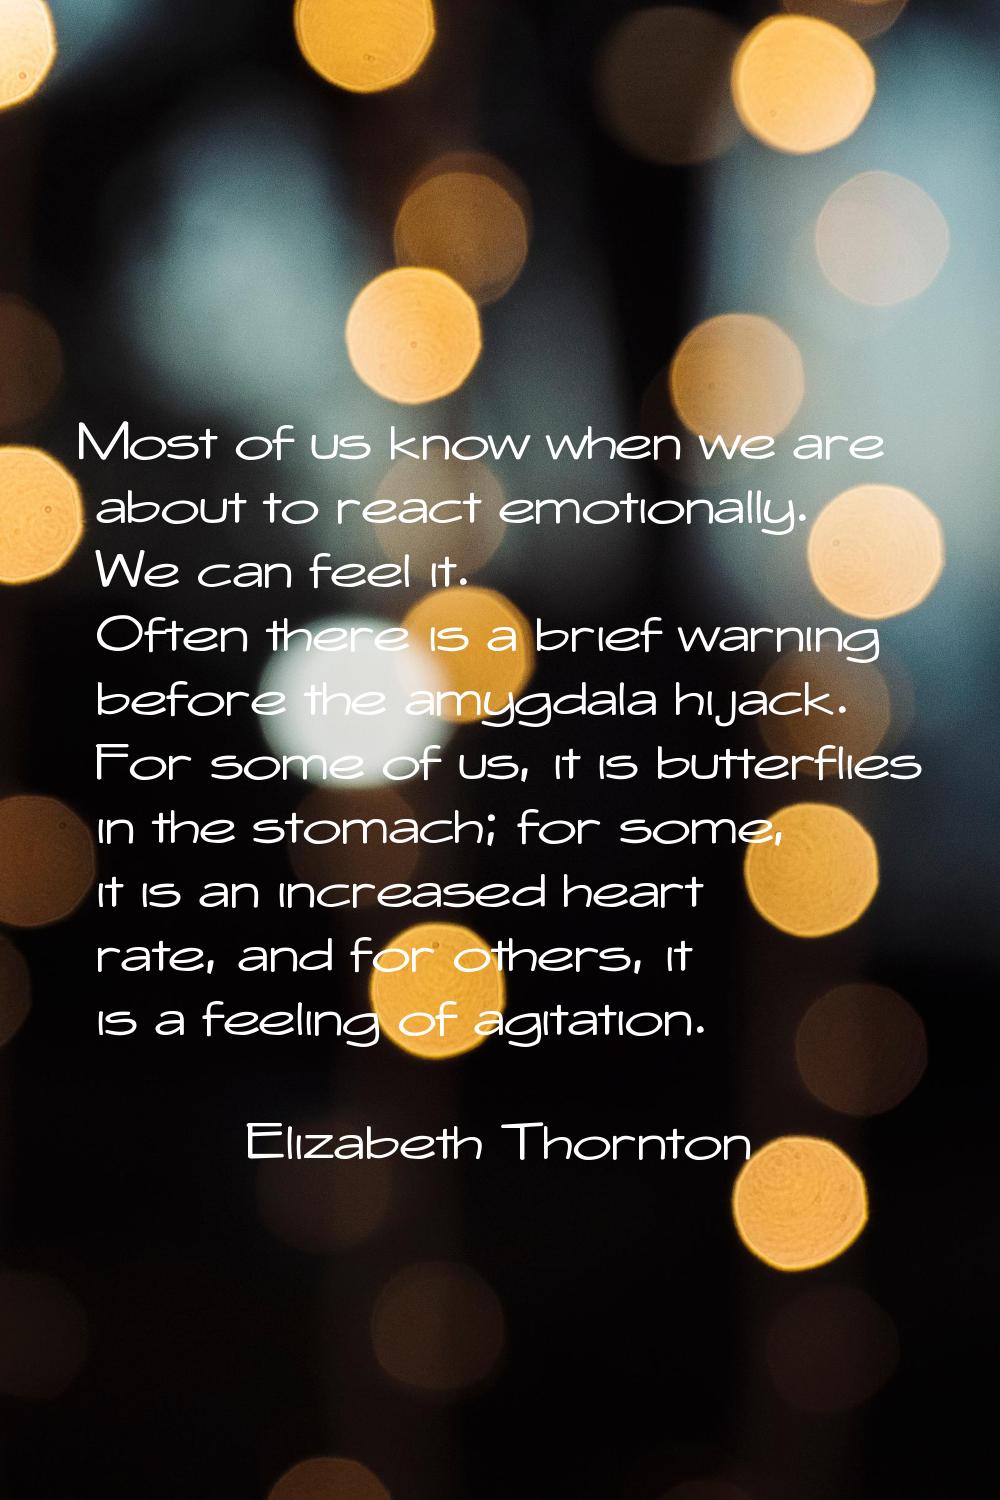 Most of us know when we are about to react emotionally. We can feel it. Often there is a brief warn